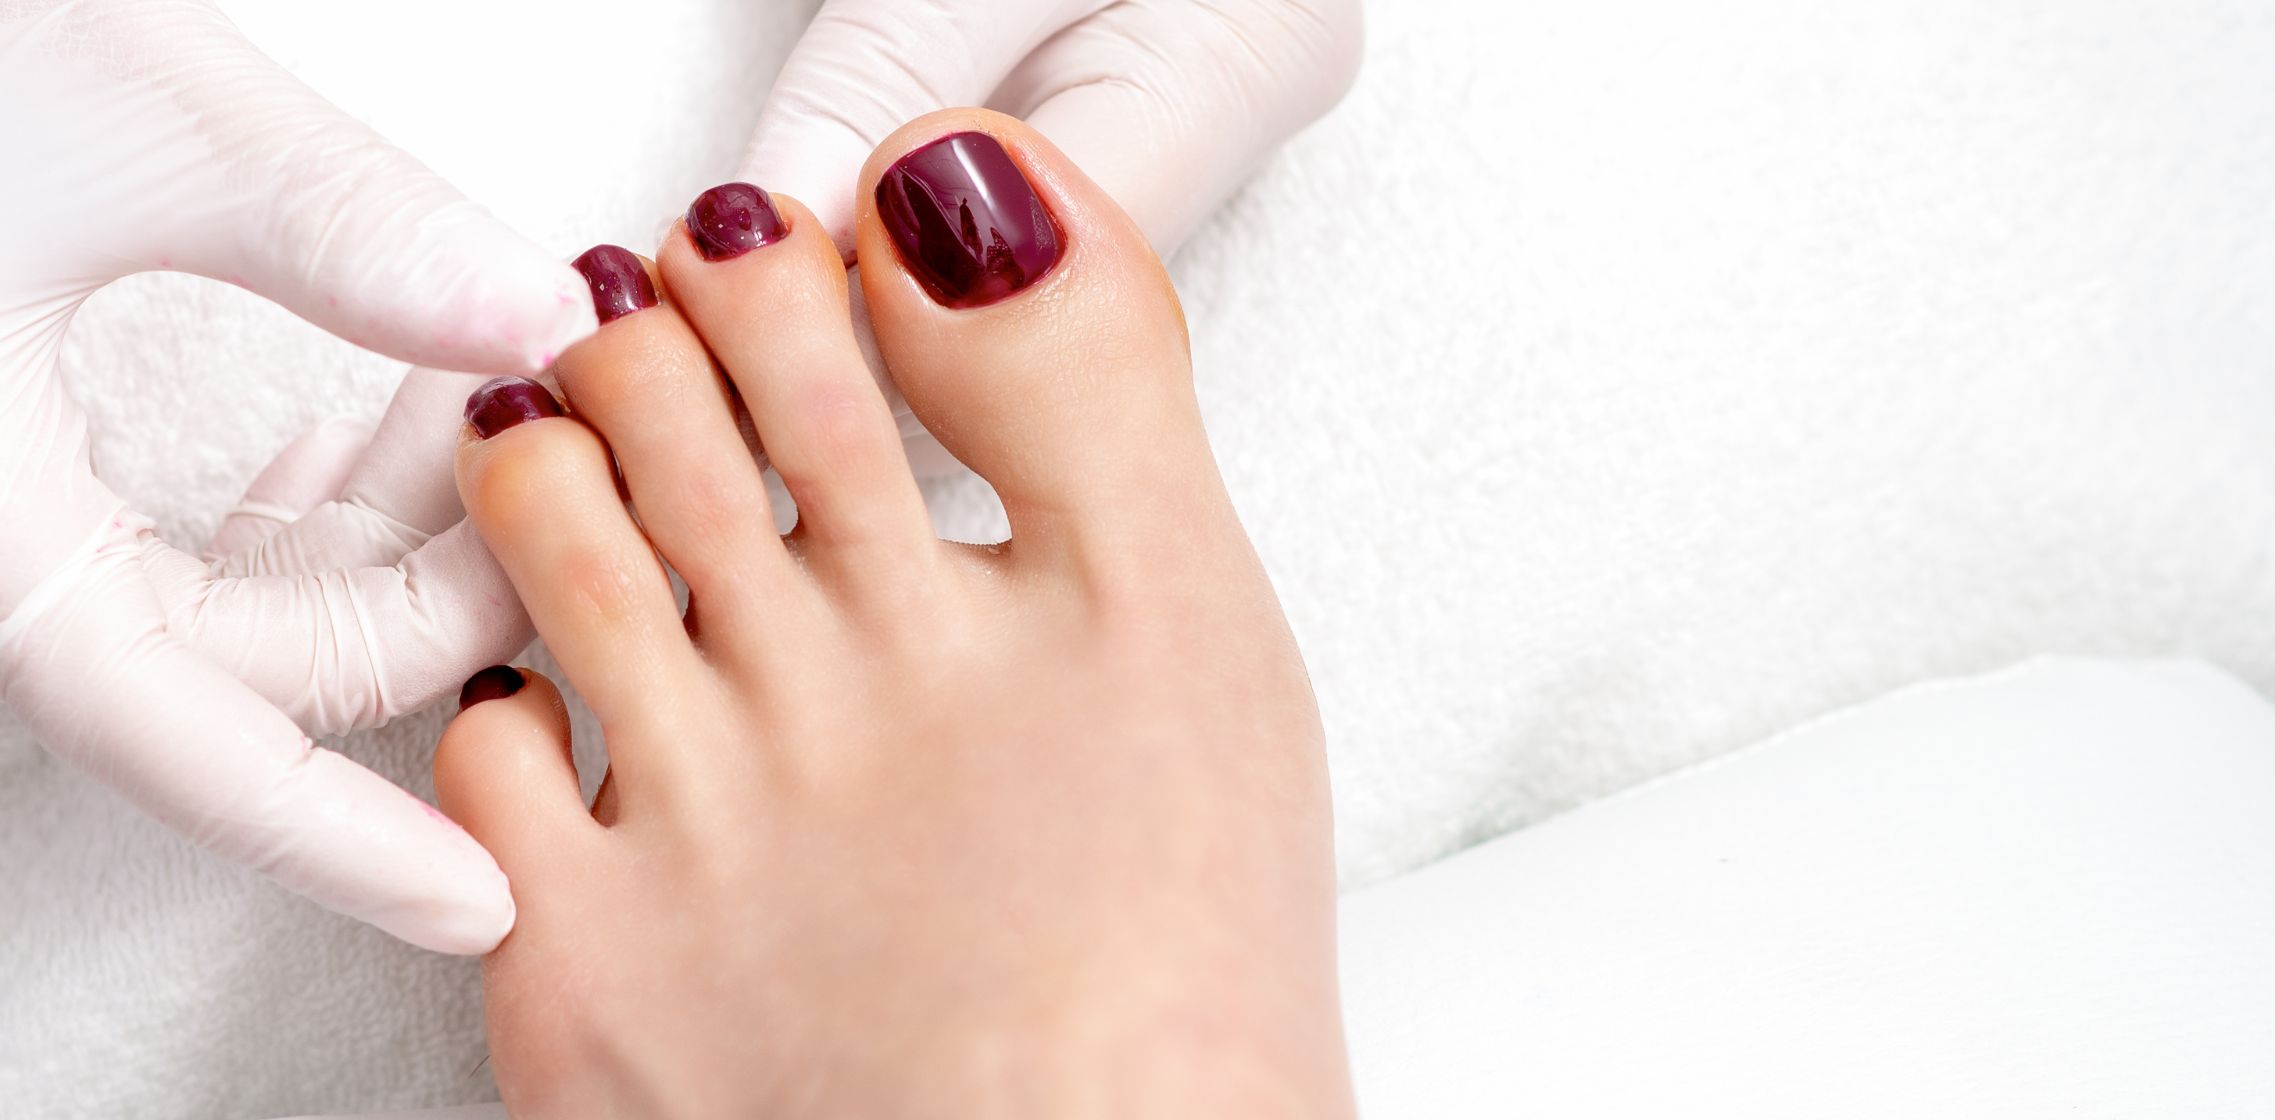 Why UFC Fighters Paint Their Toenails